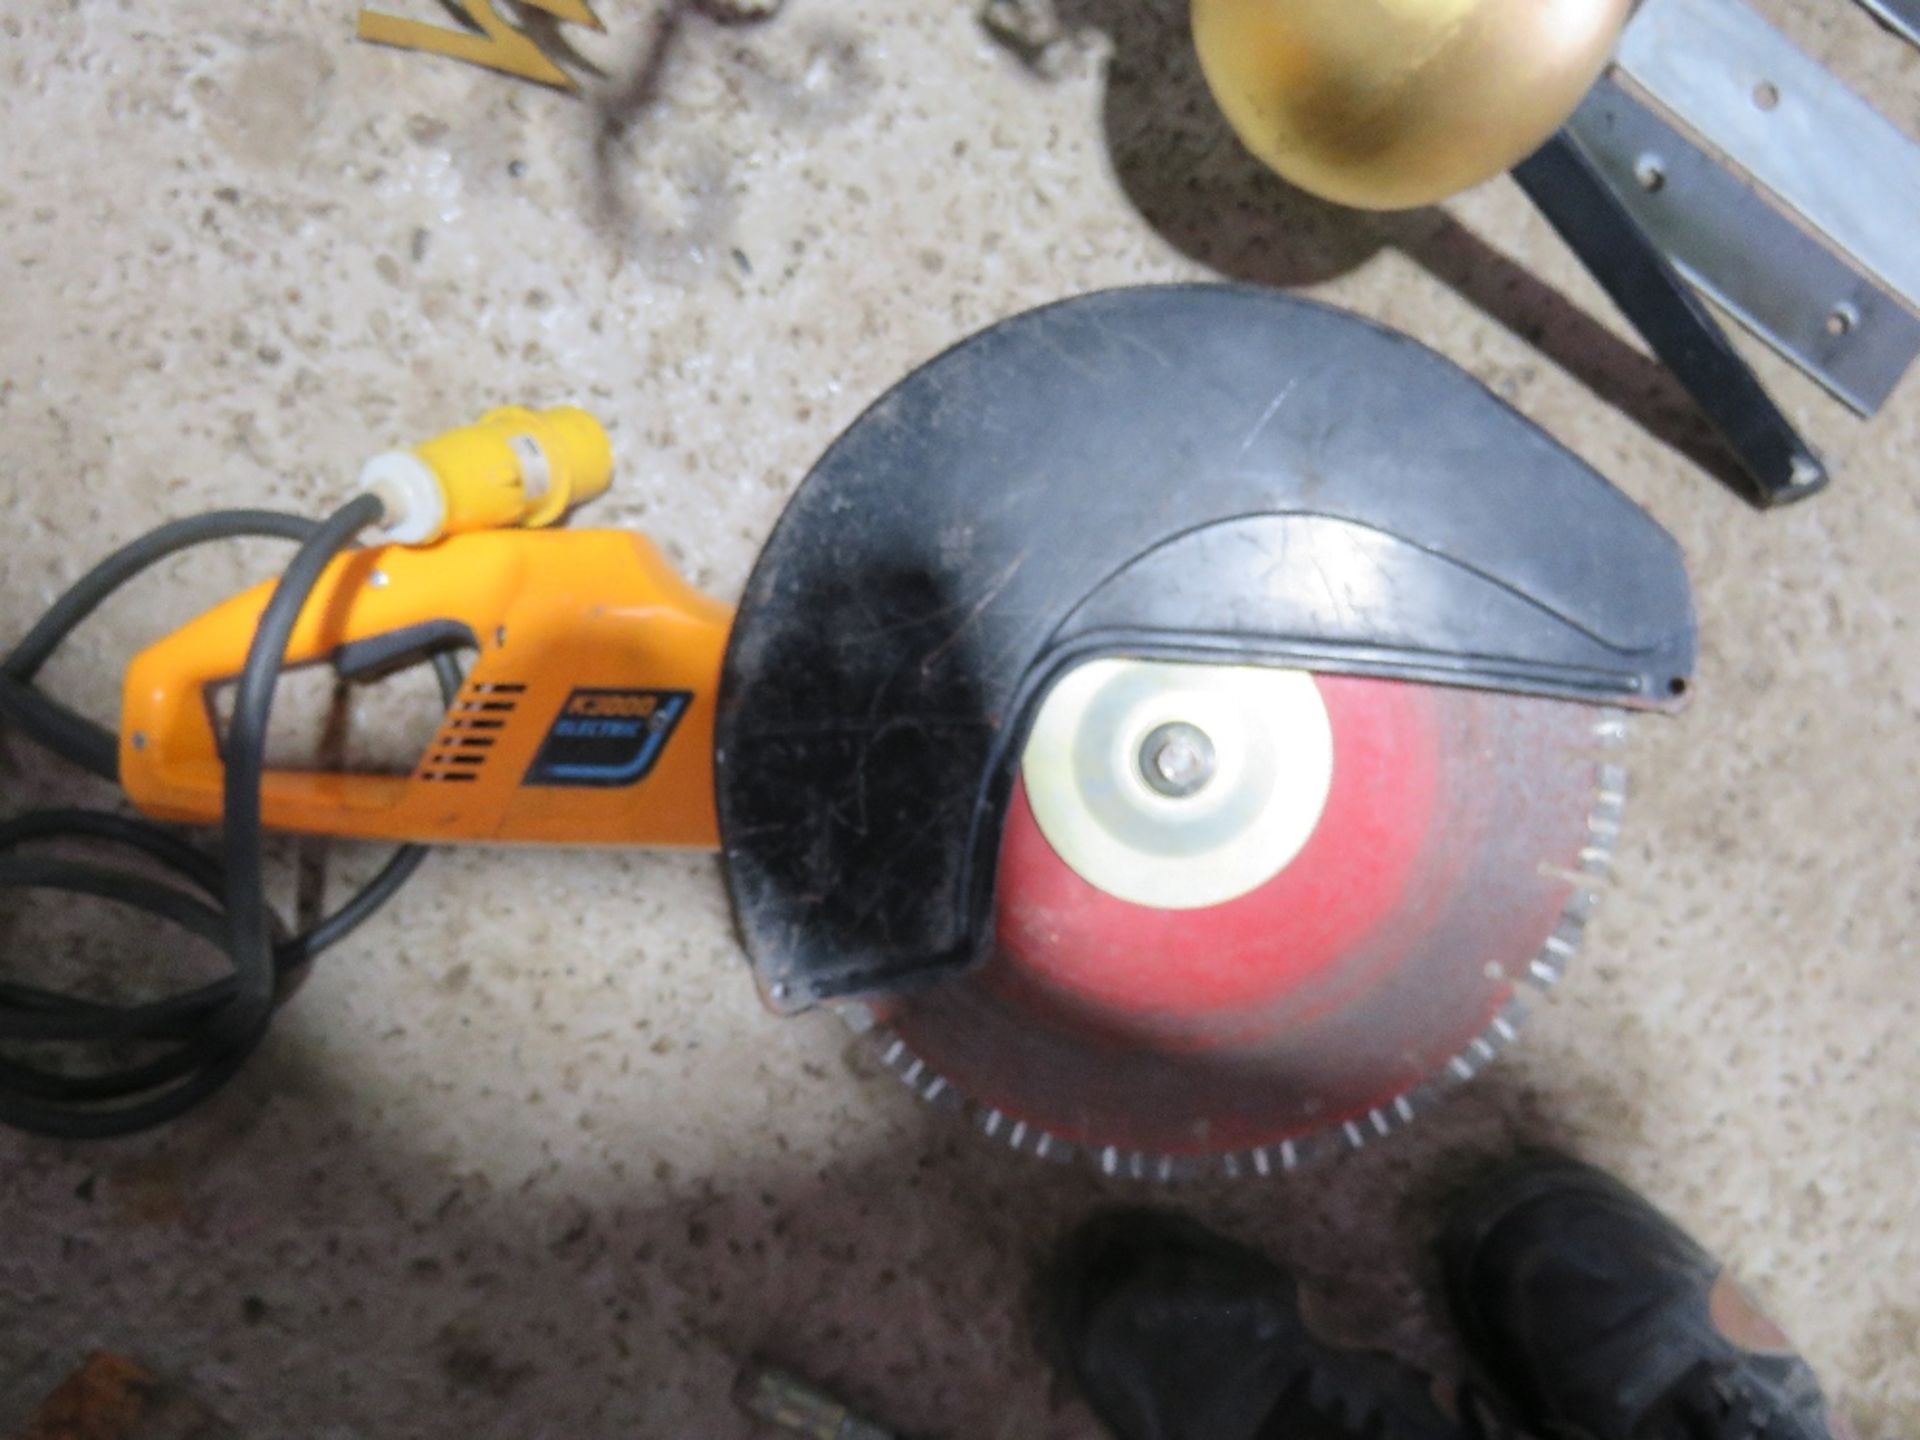 PARTNER K3000 110VOLT POWERED CUT OFF SAW WITH BLADE, SEEN RUNNING. THIS LOT IS SOLD UNDER THE AU - Image 2 of 2